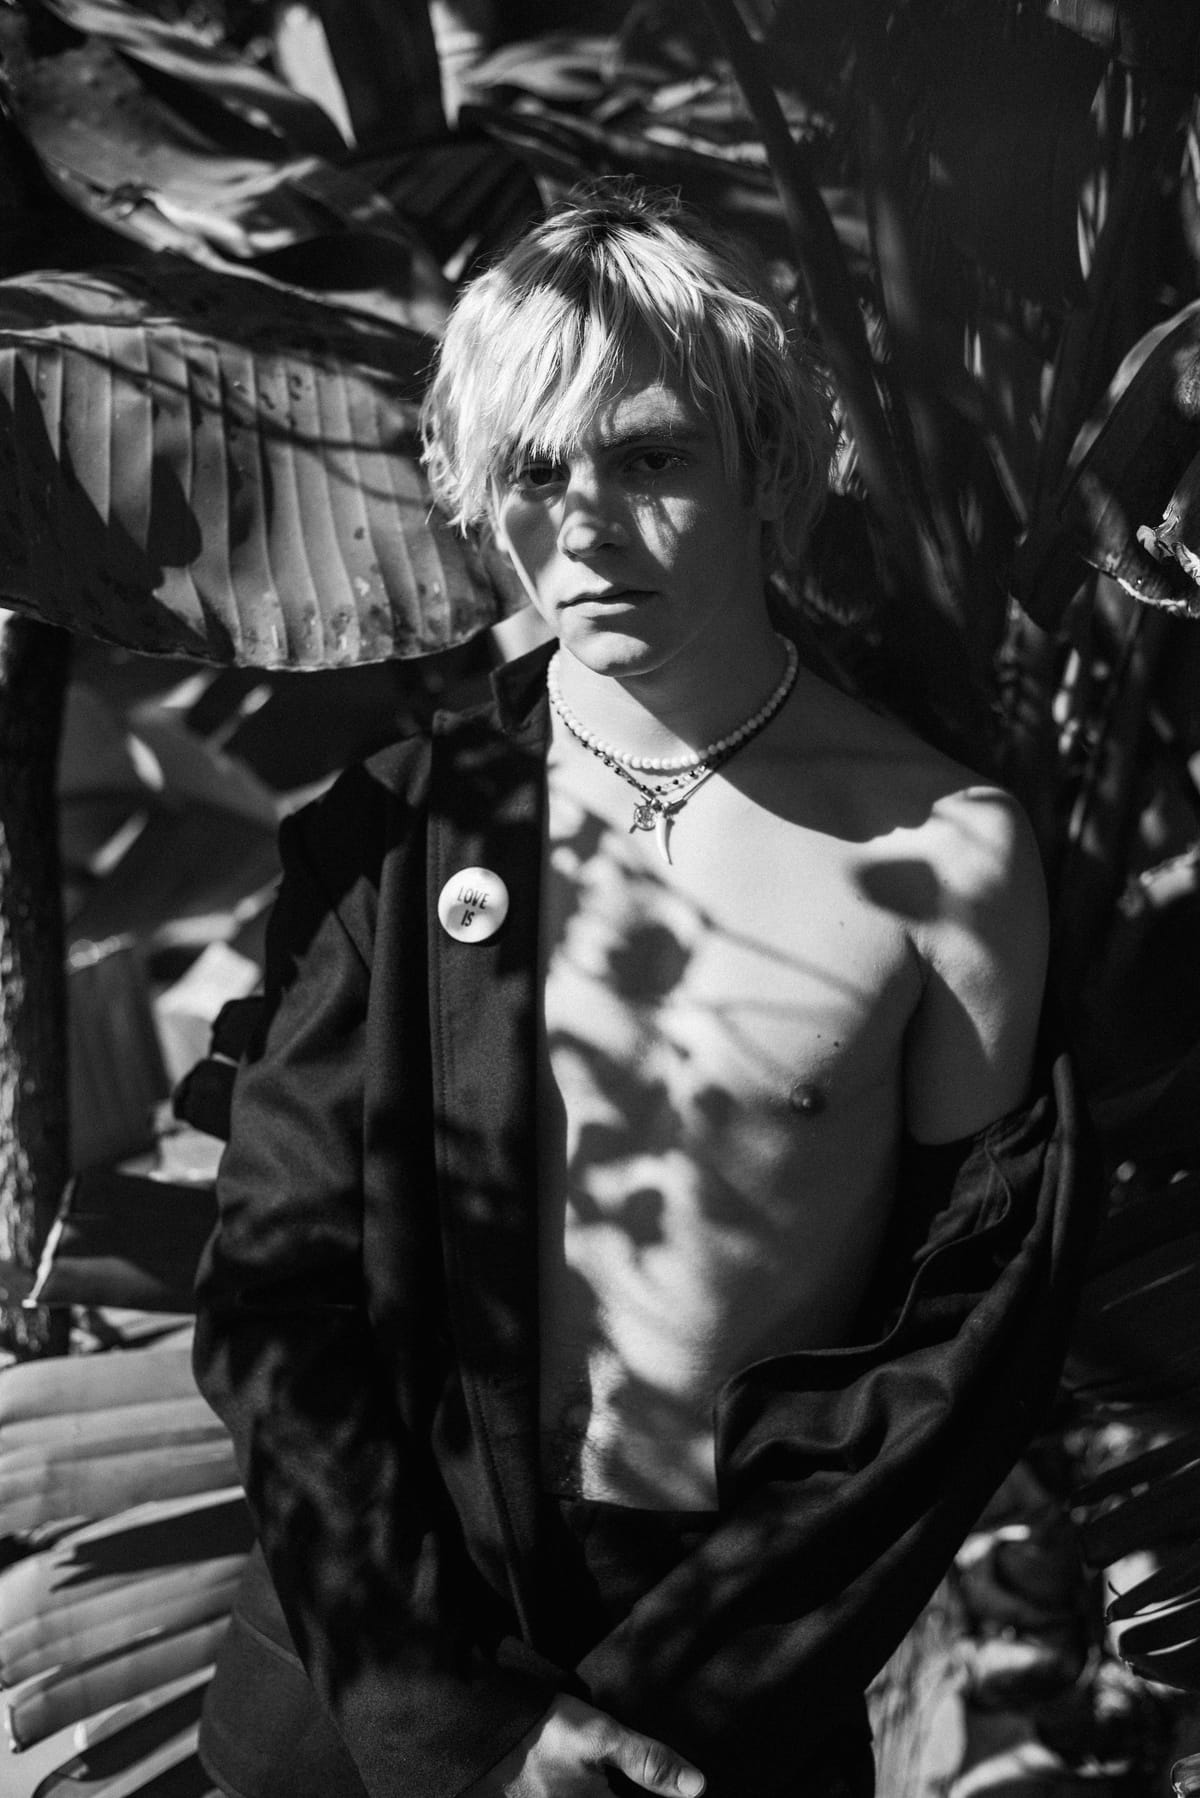 Neckless by Palace Costume. Actor: Ross Lynch. Stylist: Sean Knight. Hair Stylist: Lucy Halperin